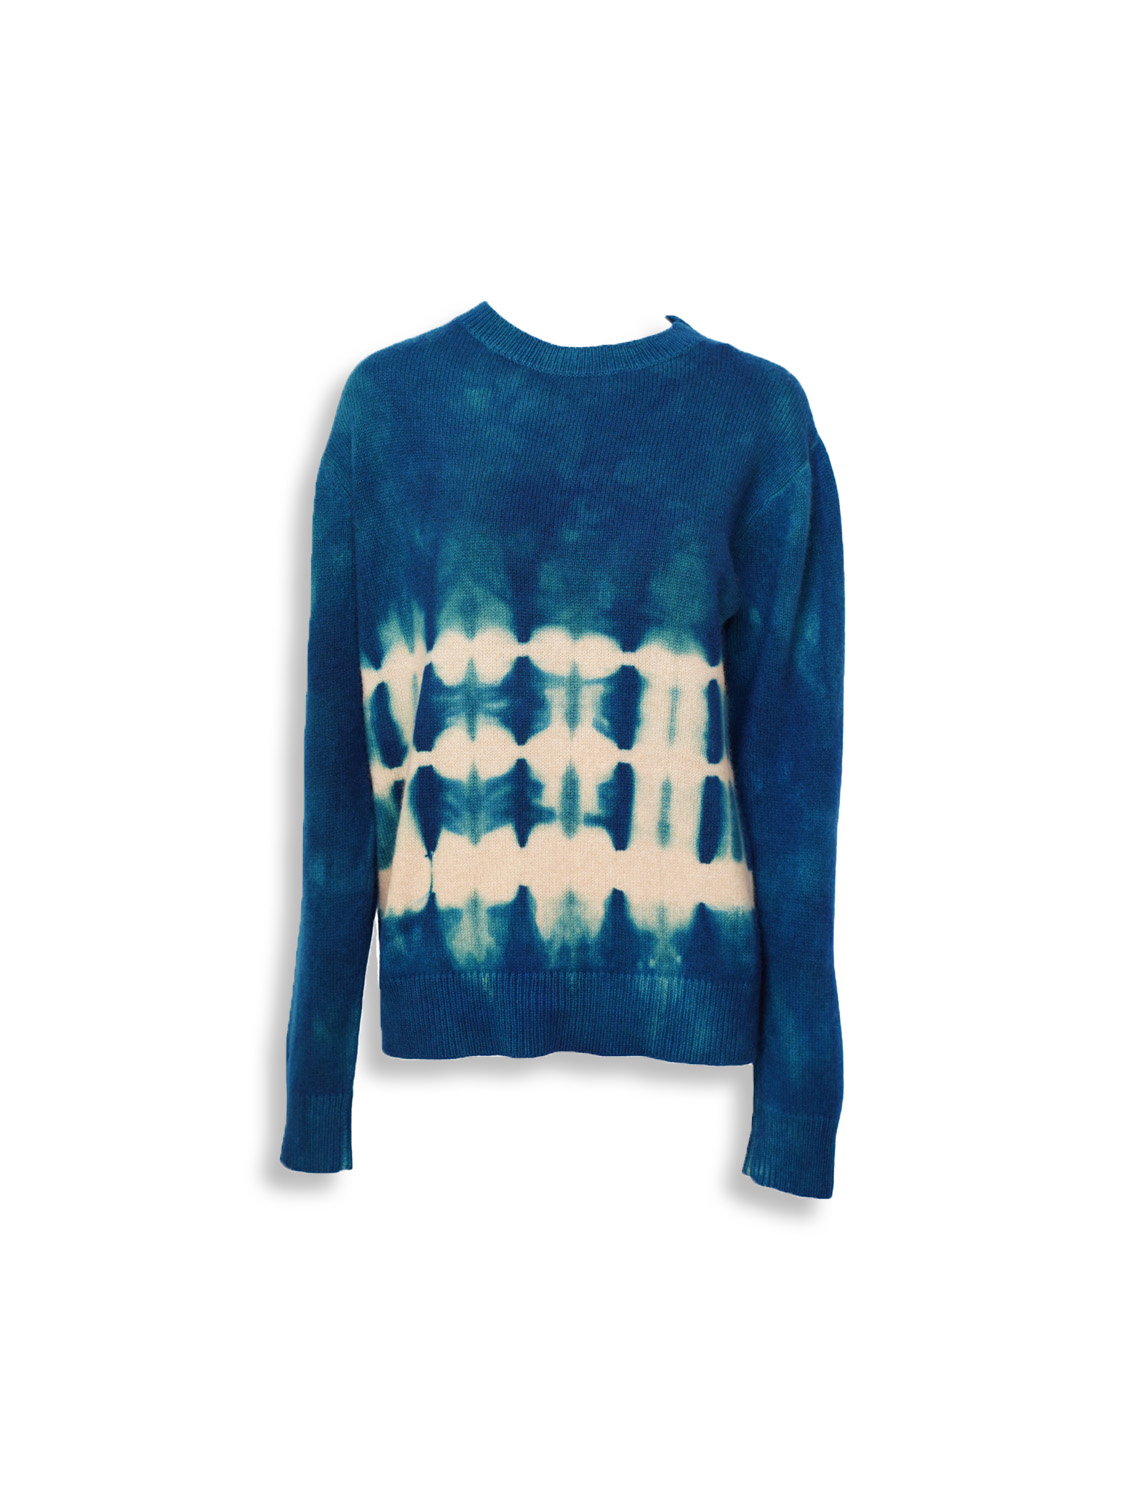 vision crew - long sleeve cashmere sweater with batik pattern